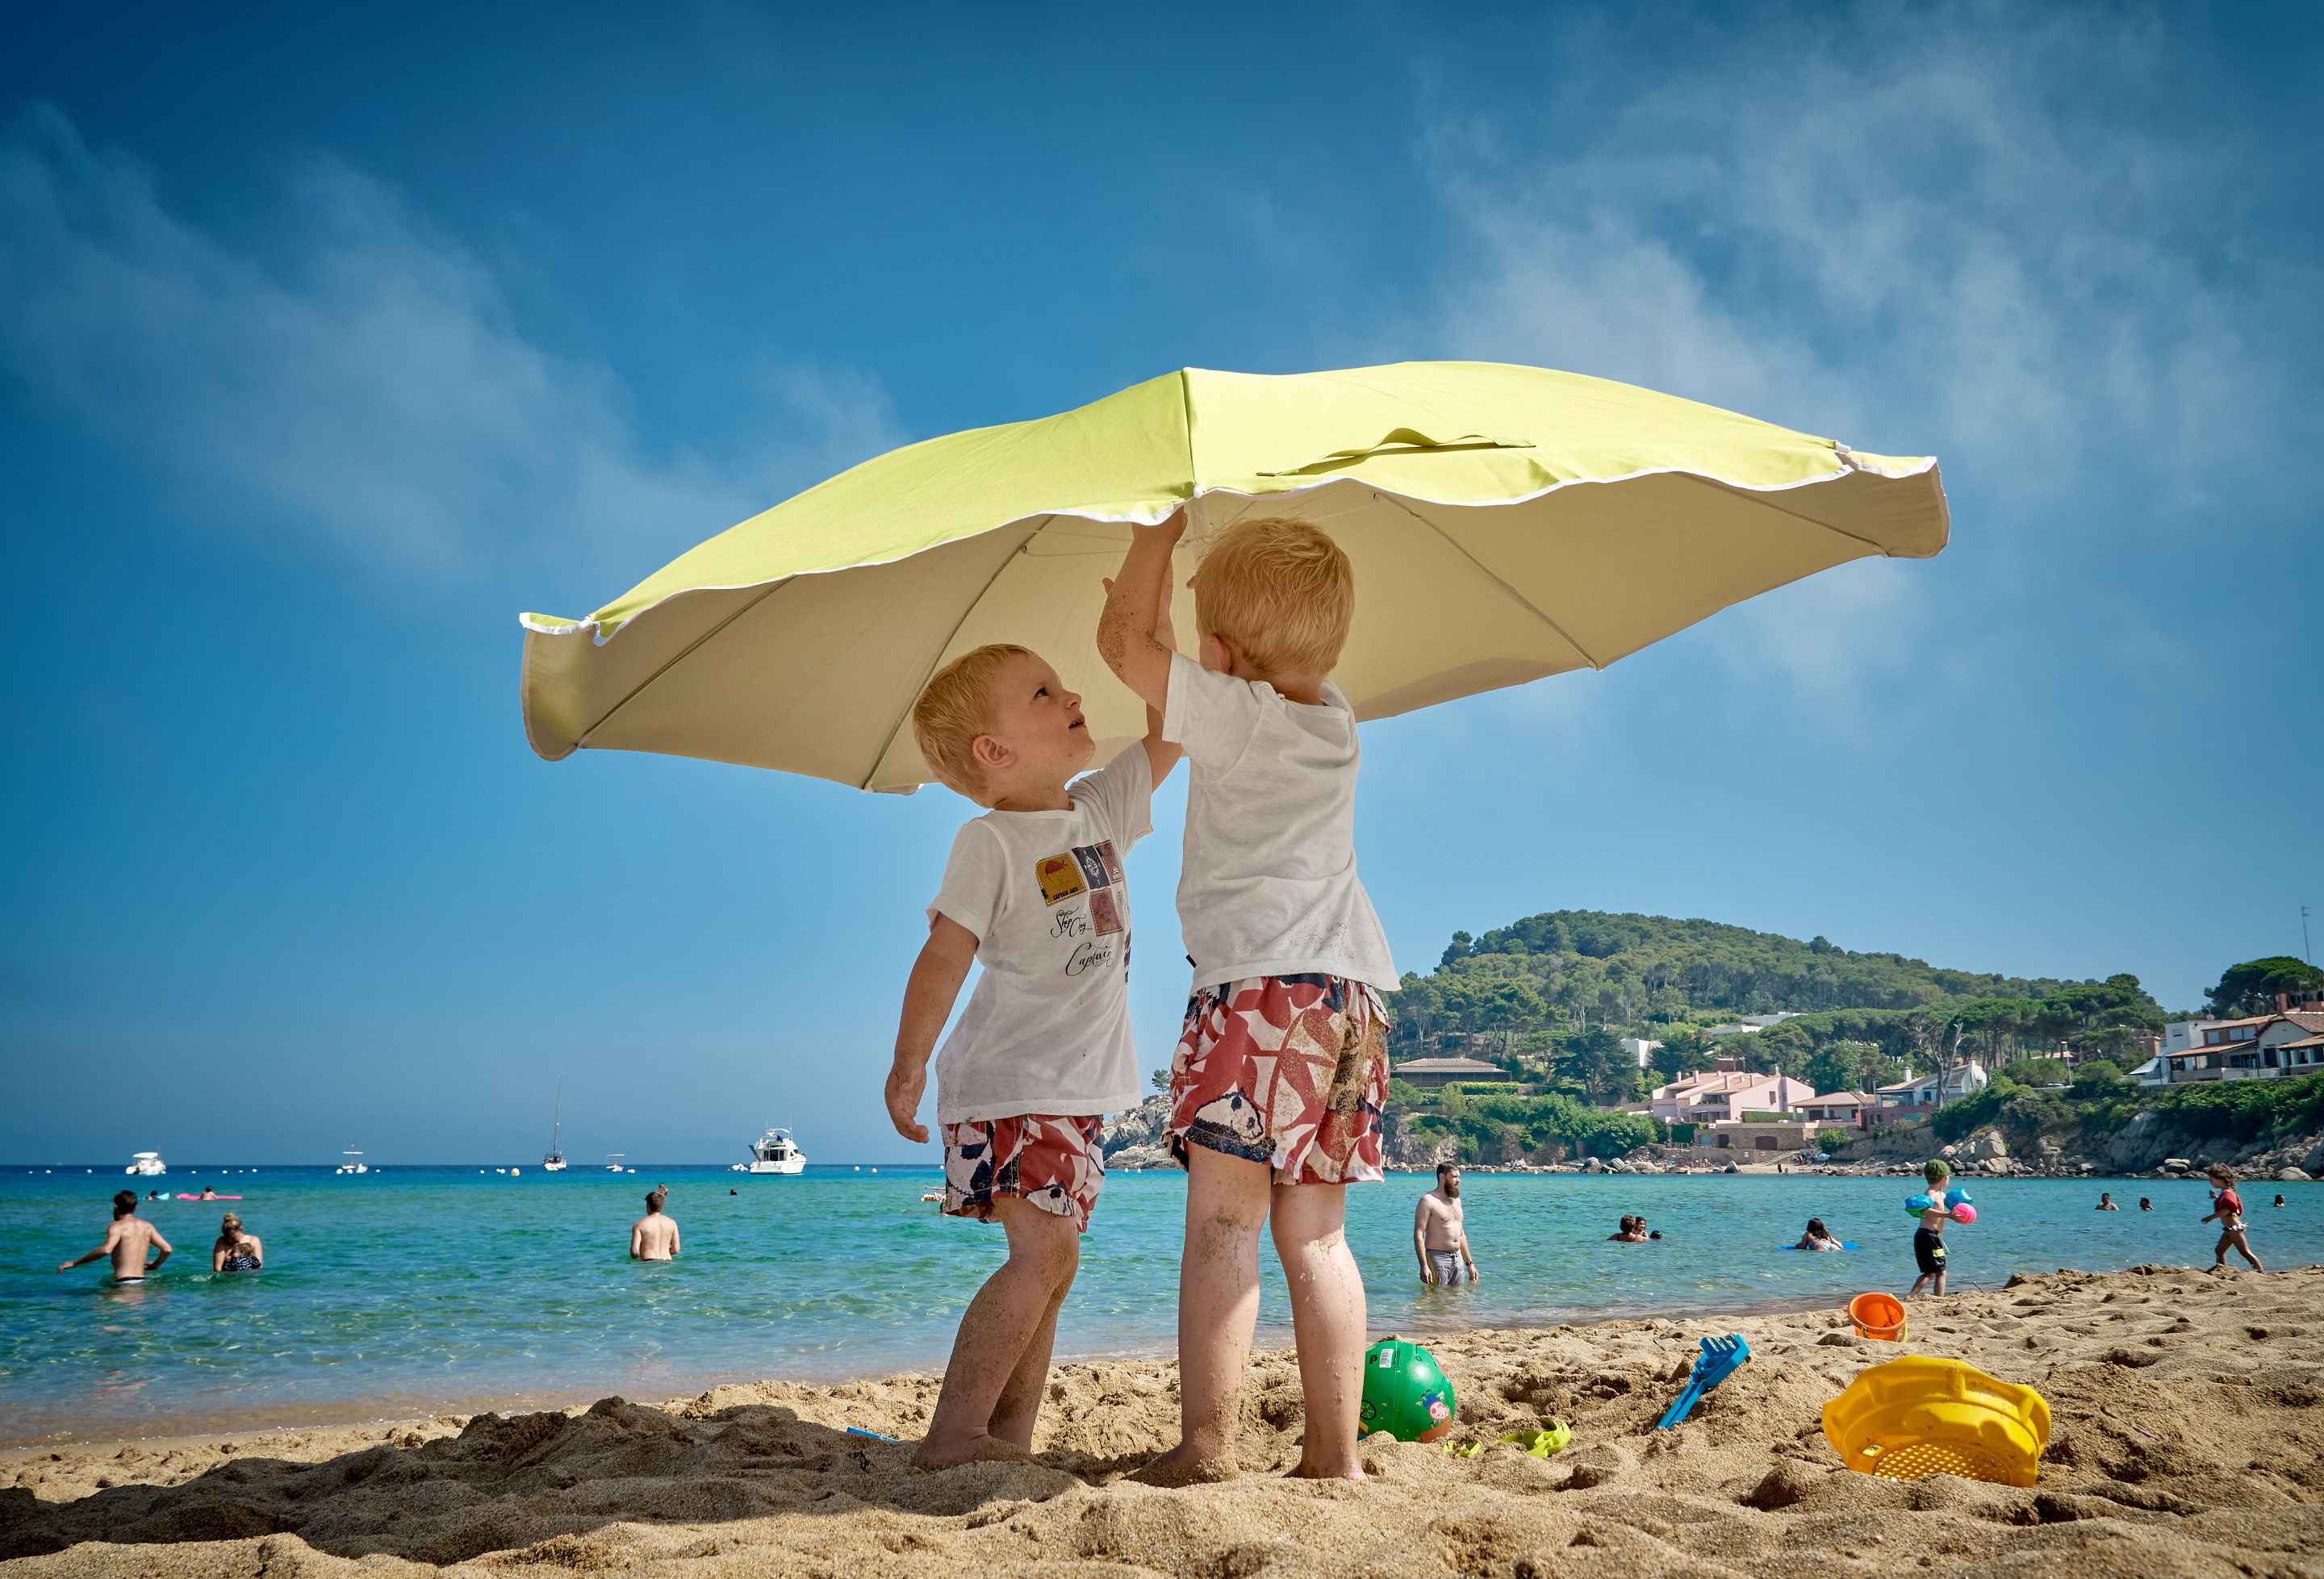 18 innovative & Fun Things to do at the Beach with Kids 32